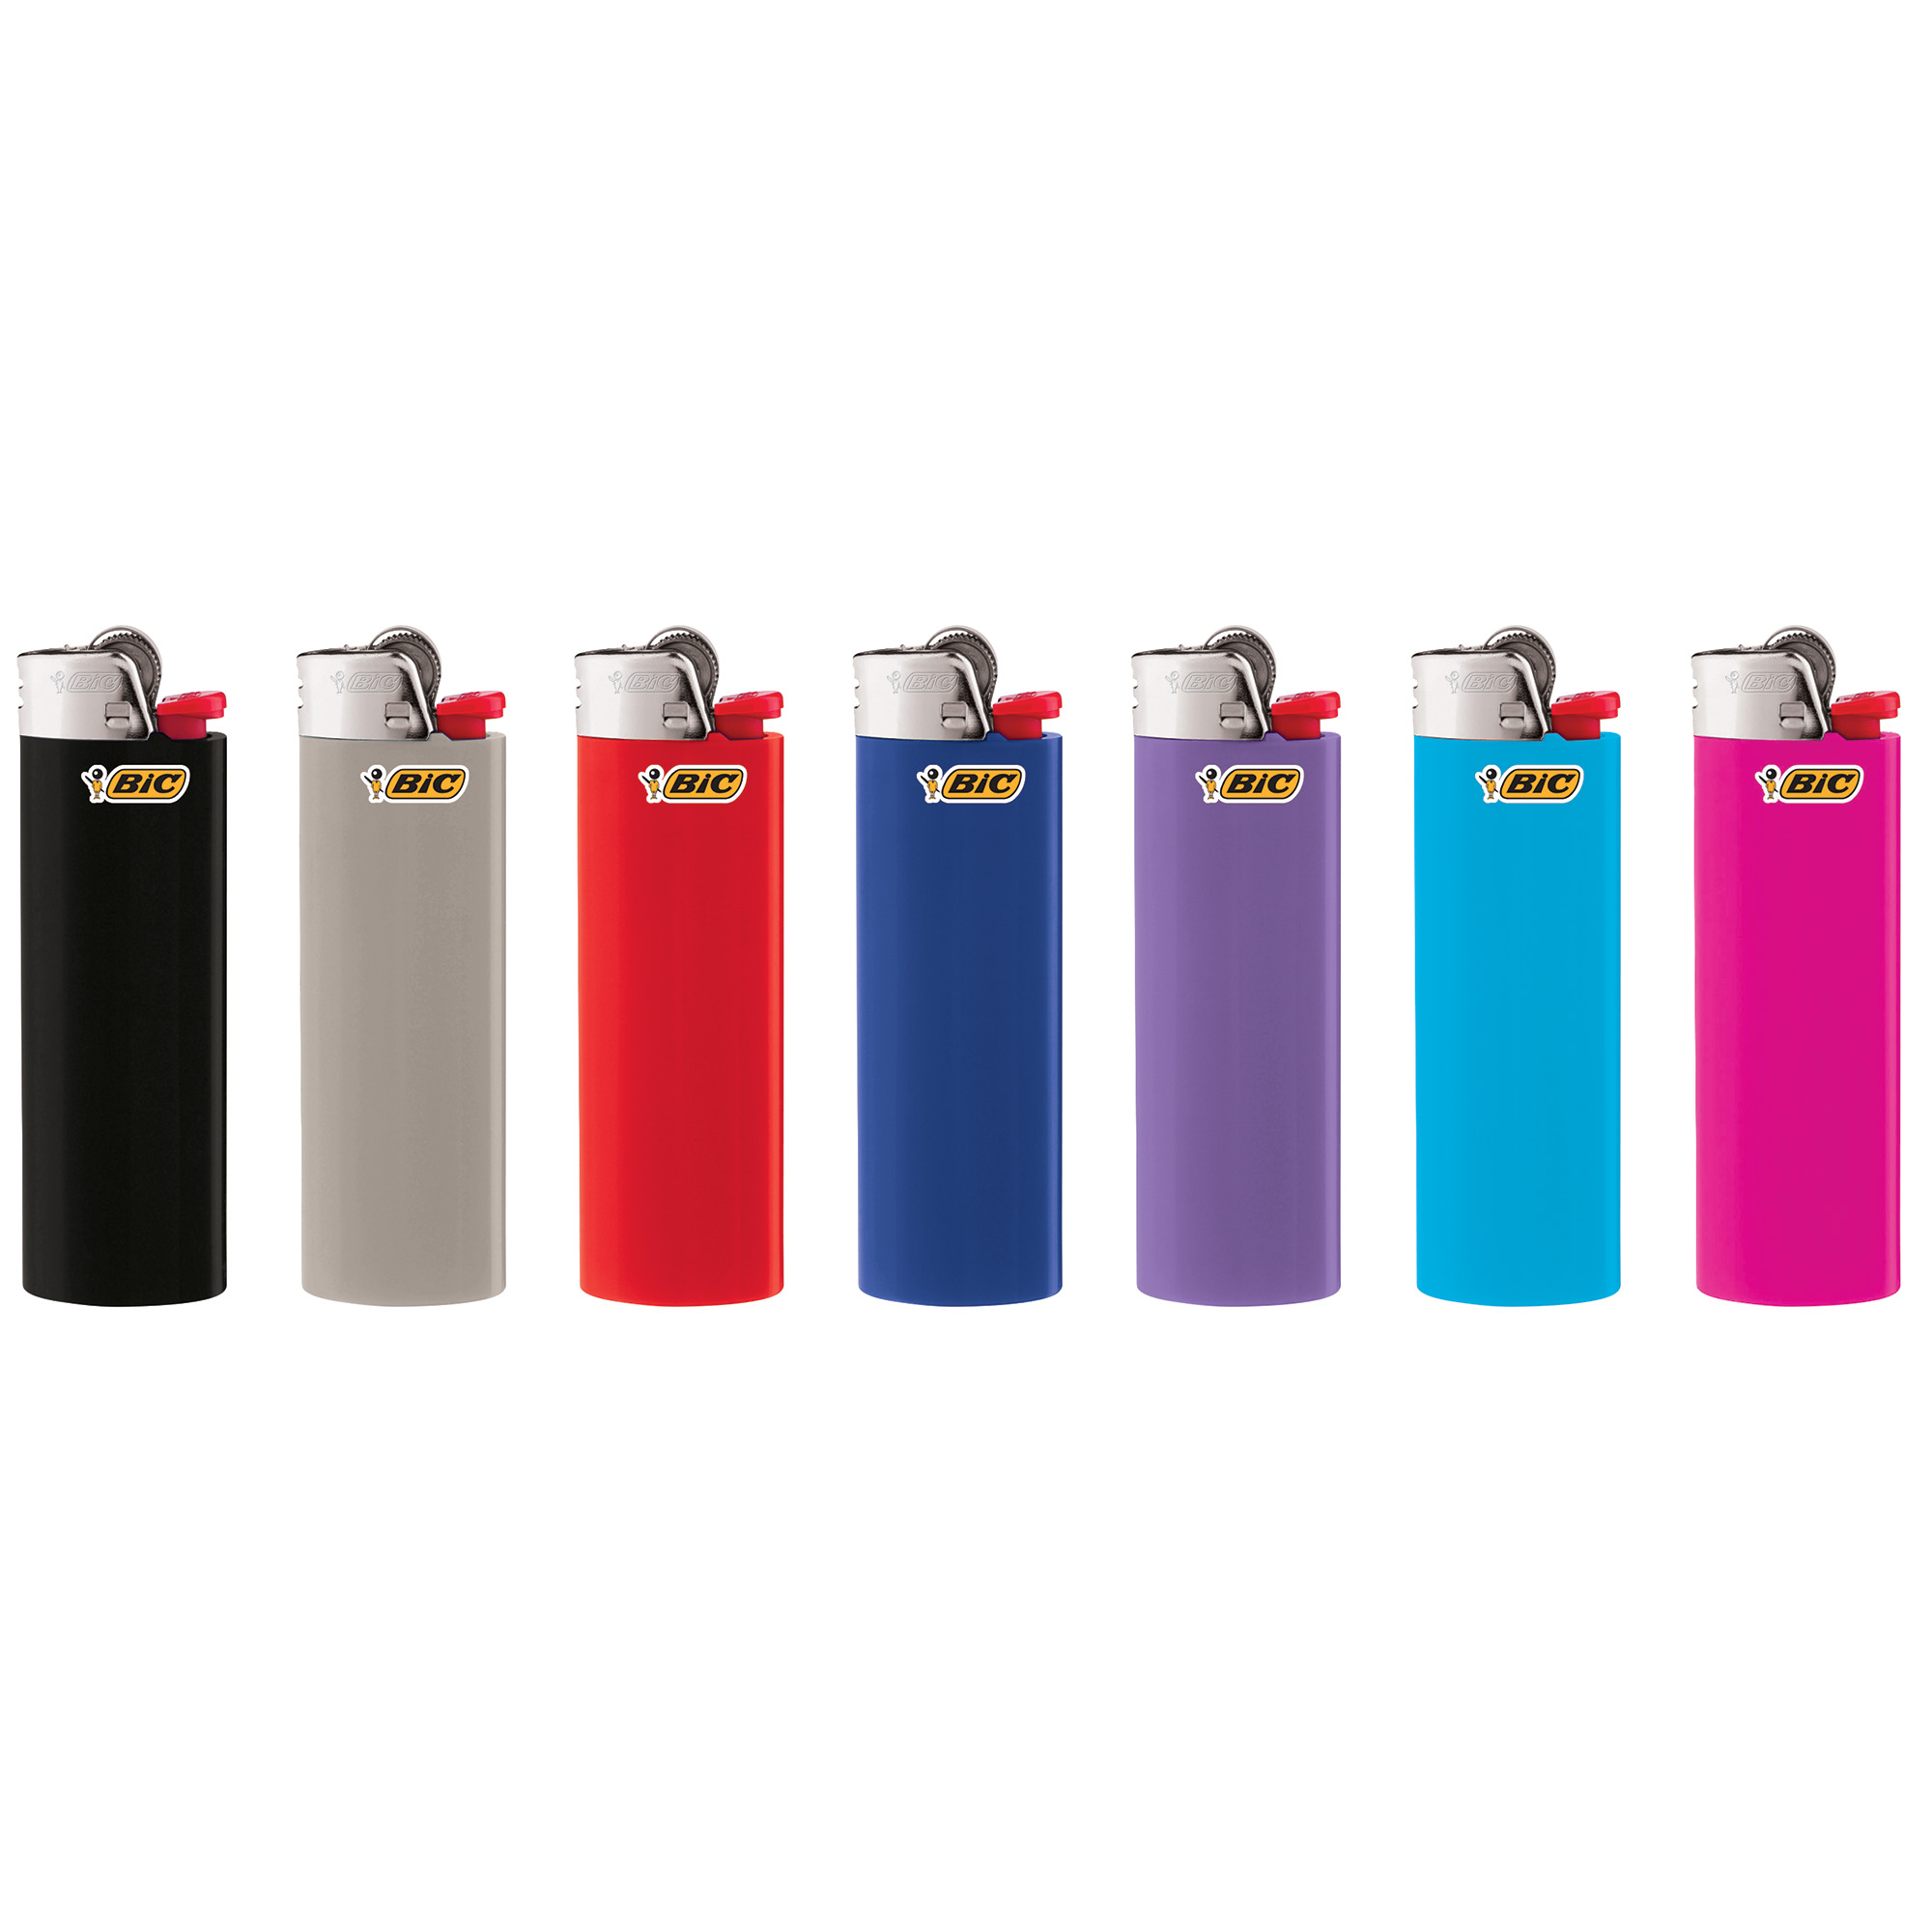 BIC Classic Pocket Lighter, Assorted Colors, 2 Pack - image 3 of 7